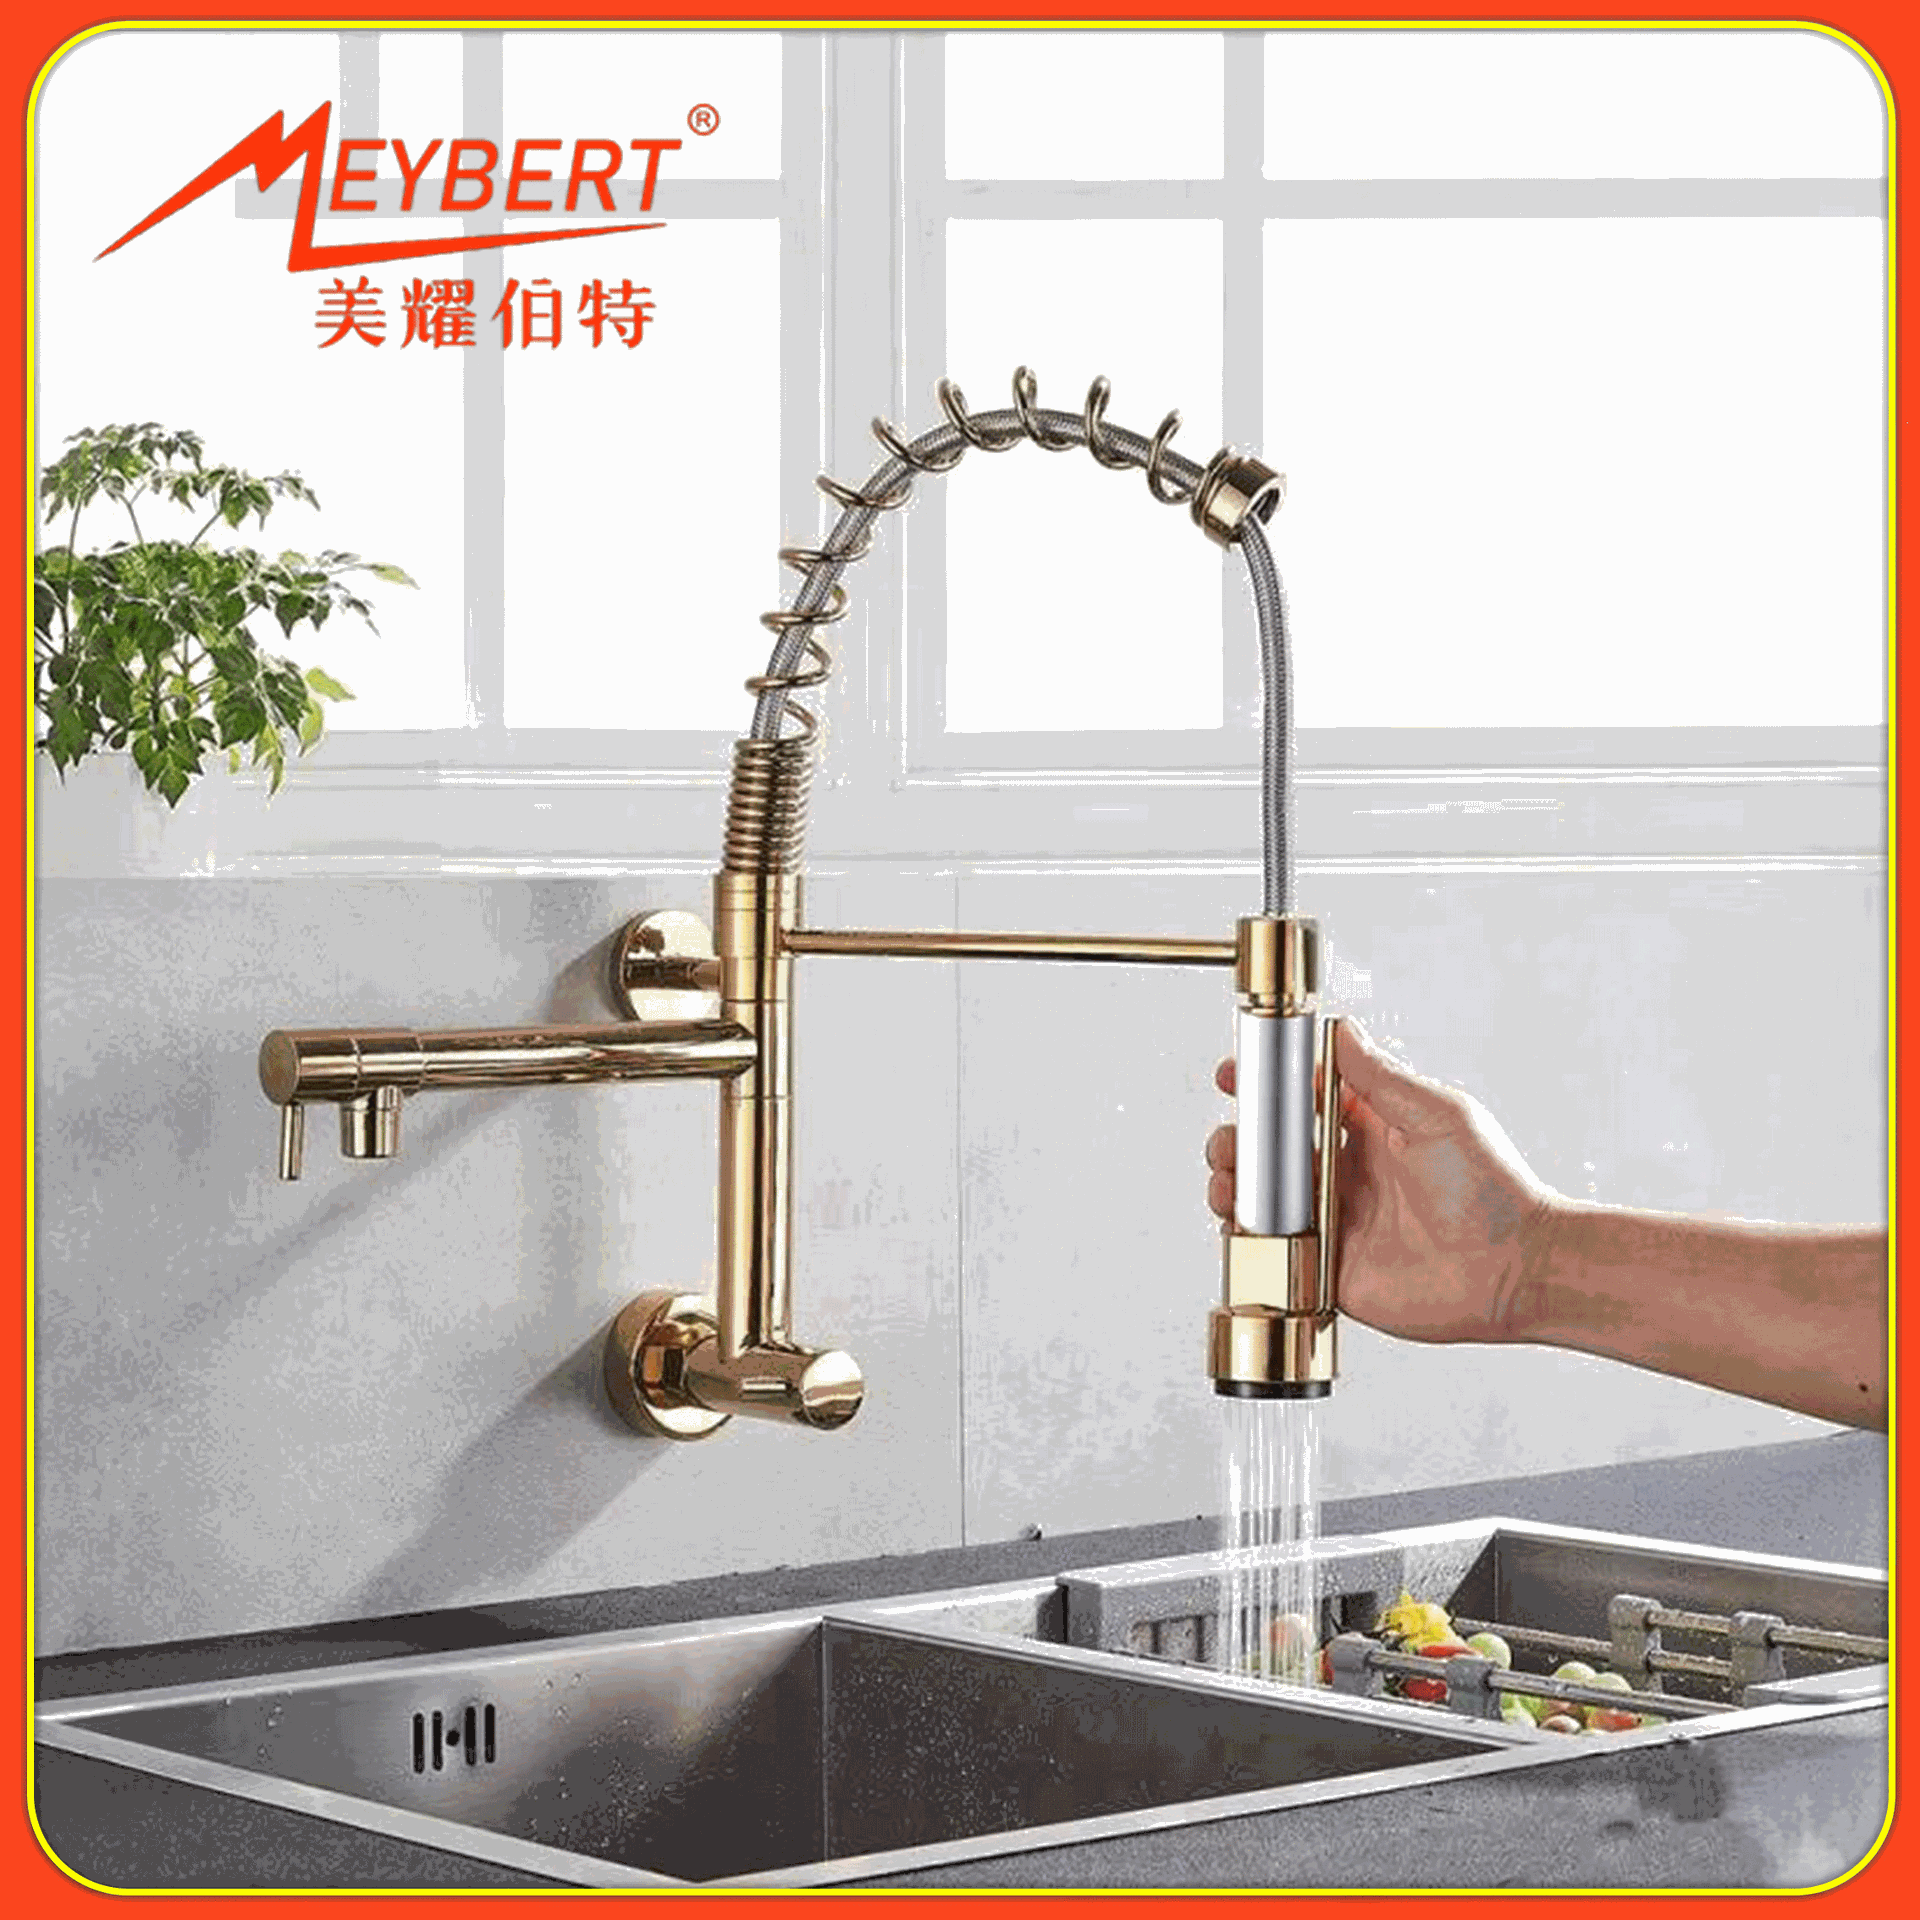  in-wall spring faucet single-cooling kitchen multifunctional universal rotating double outlet pull-out faucet